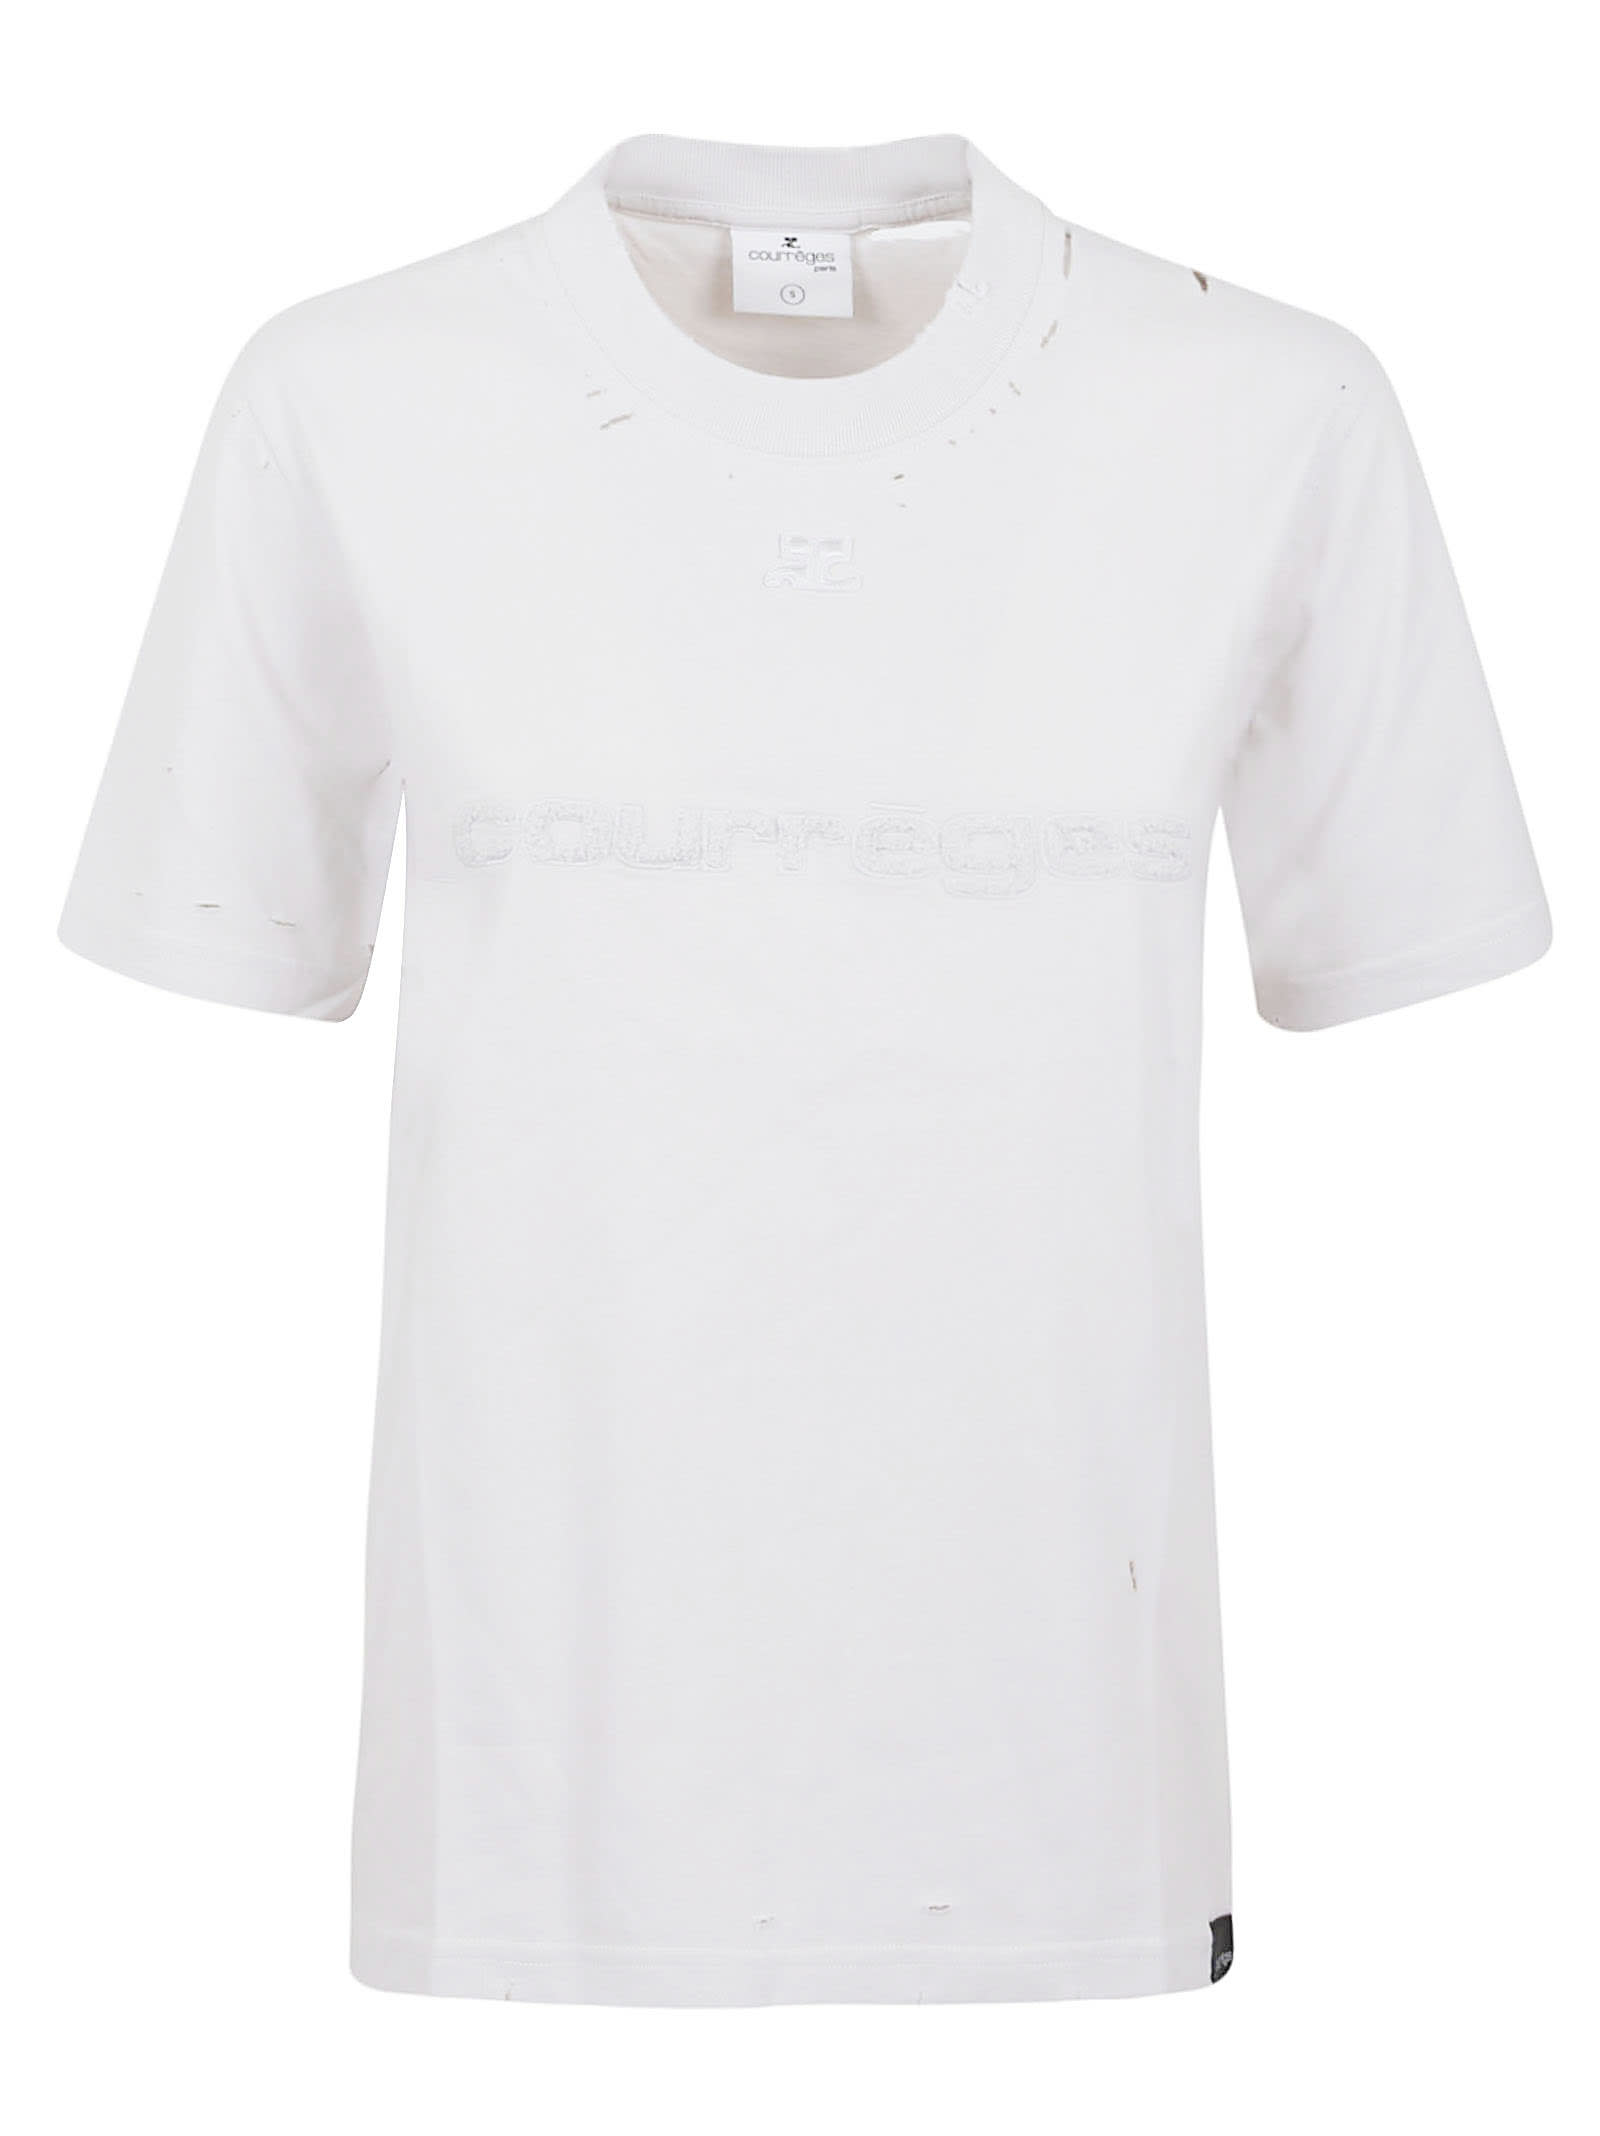 COURRÈGES DISTRESSED DRY JERSEY T-SHIRT